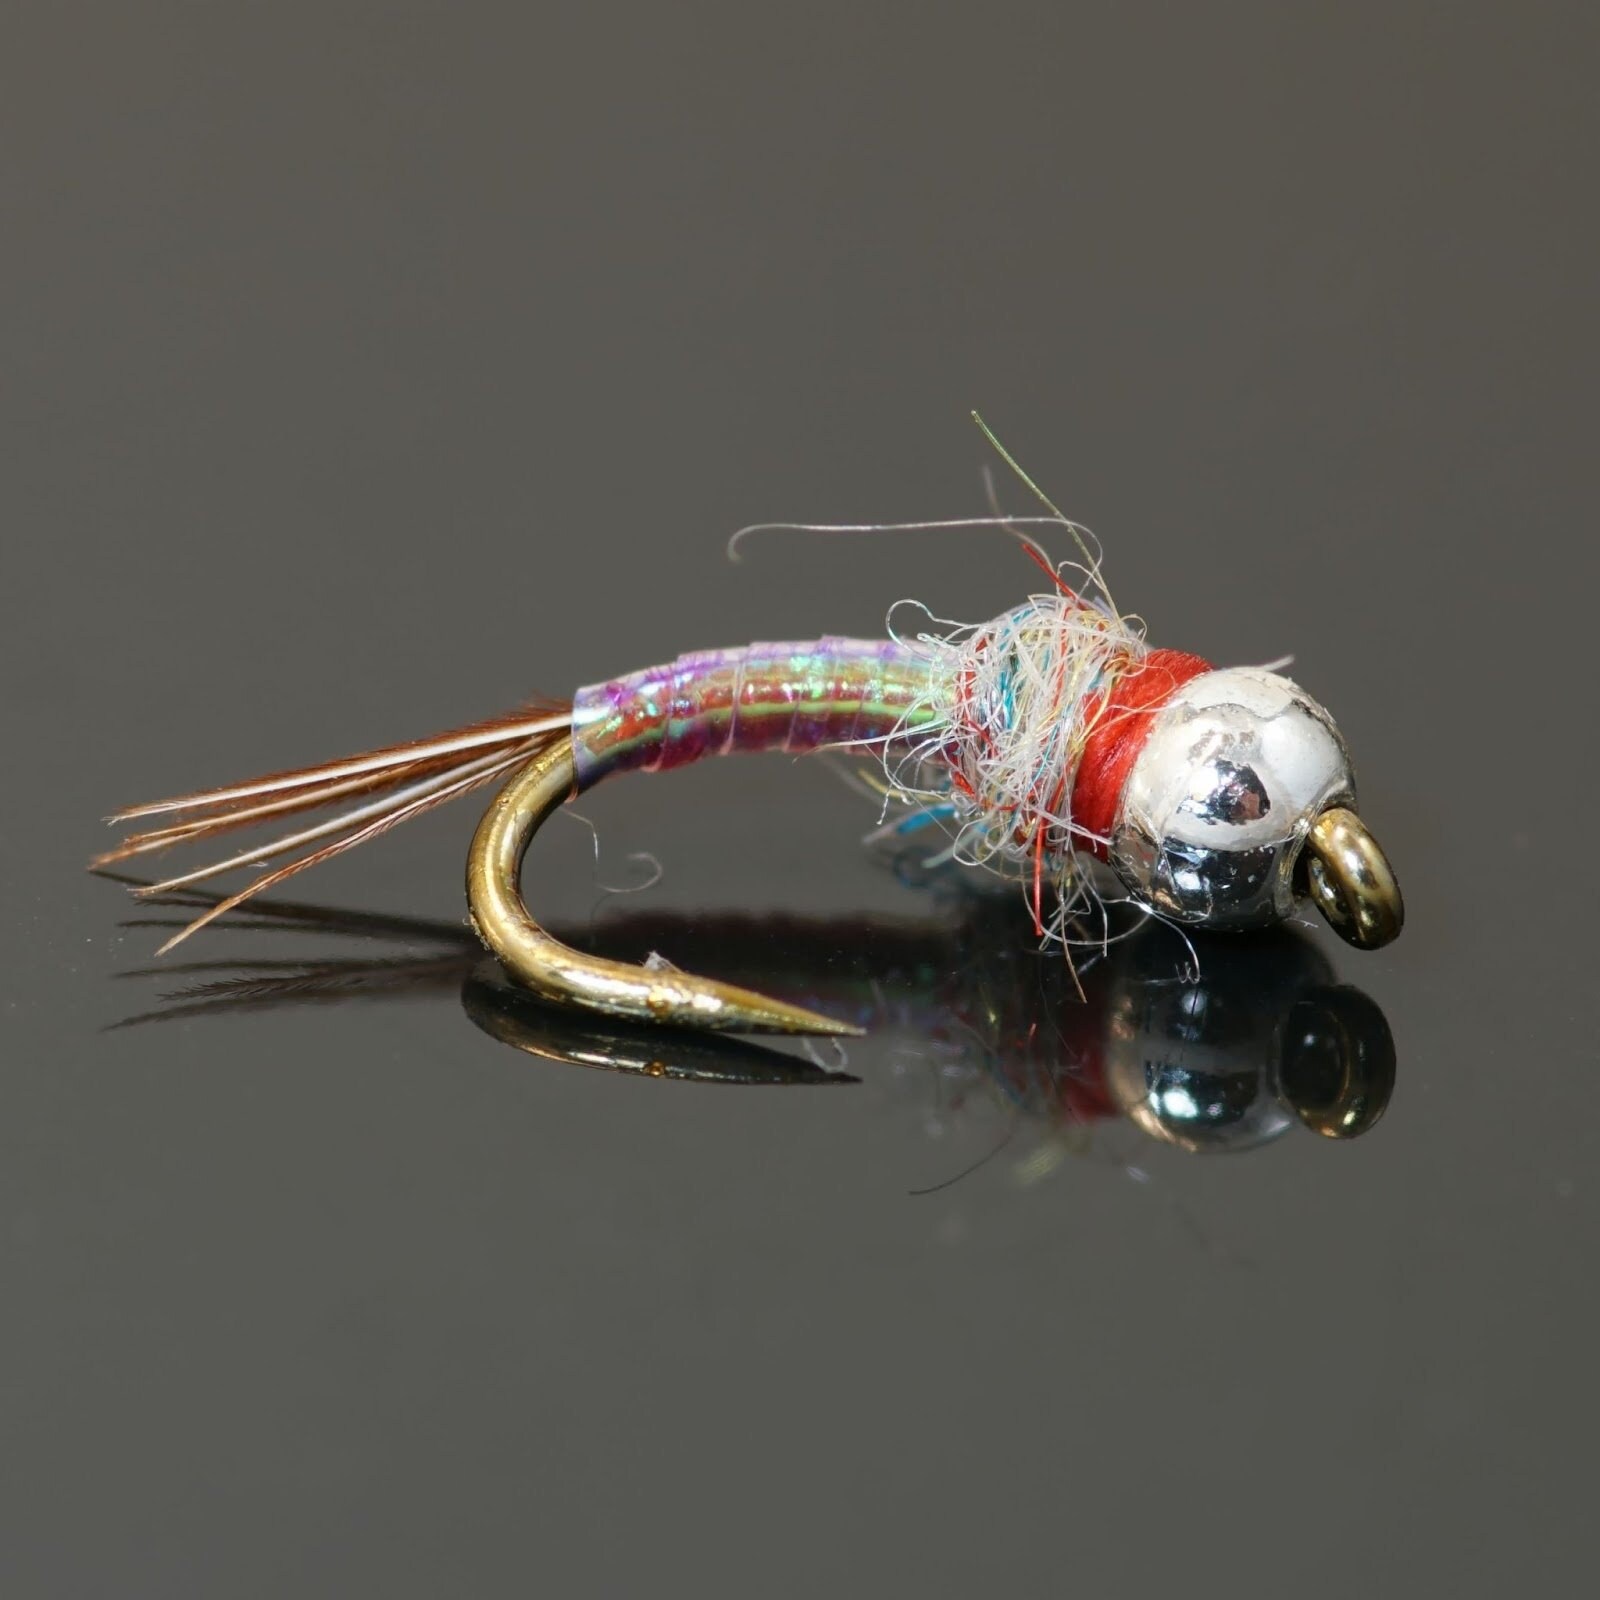 Euromax Sighter: Modular Euro-nymphing Fly Leader 